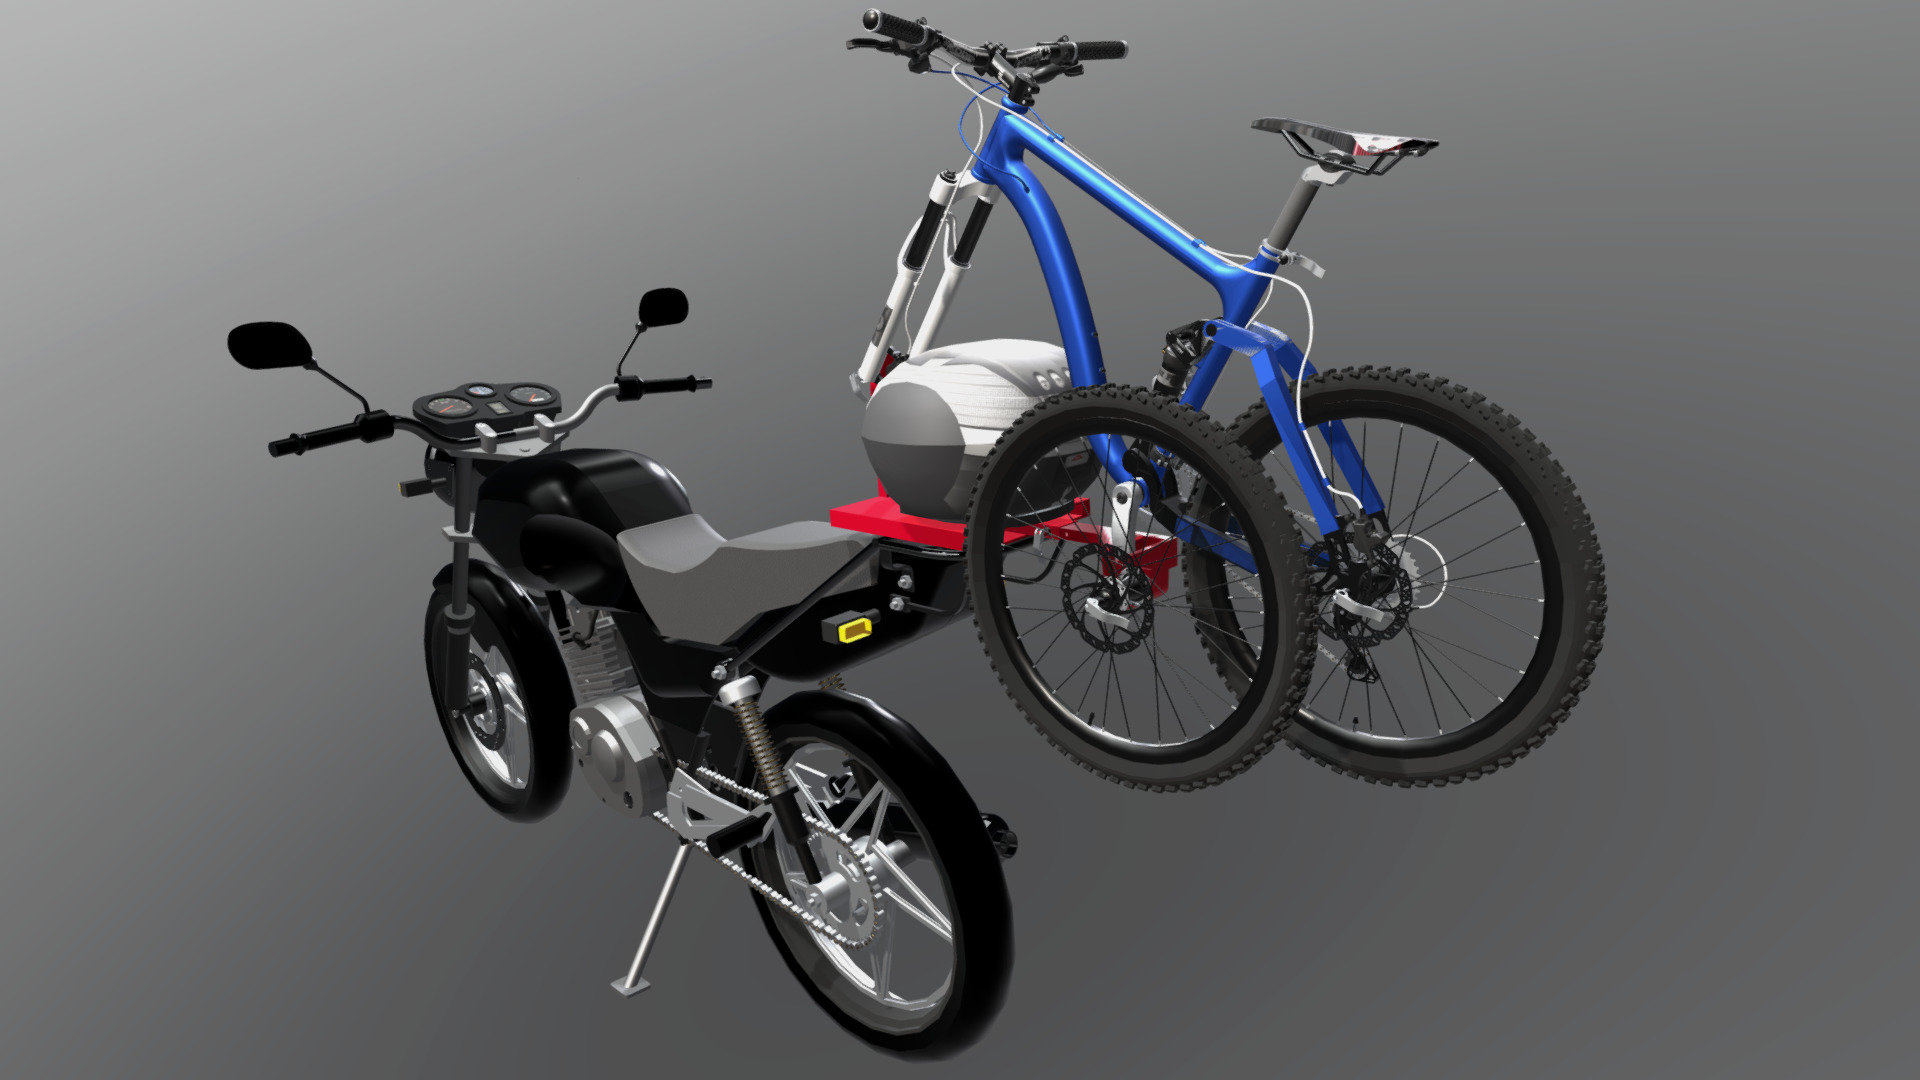 Mountain bike carrier prototype for motorcycles to be locally manufactured for Latin-America use. It is adjustable for all mountain bikes sizes even for lefty models and it can be mounted in almost all motorcycles models using their own sub-frames even using a luggage top racks - Mountain Bike Carrier for Motorcycles - 3D model by jhonmont 3d model